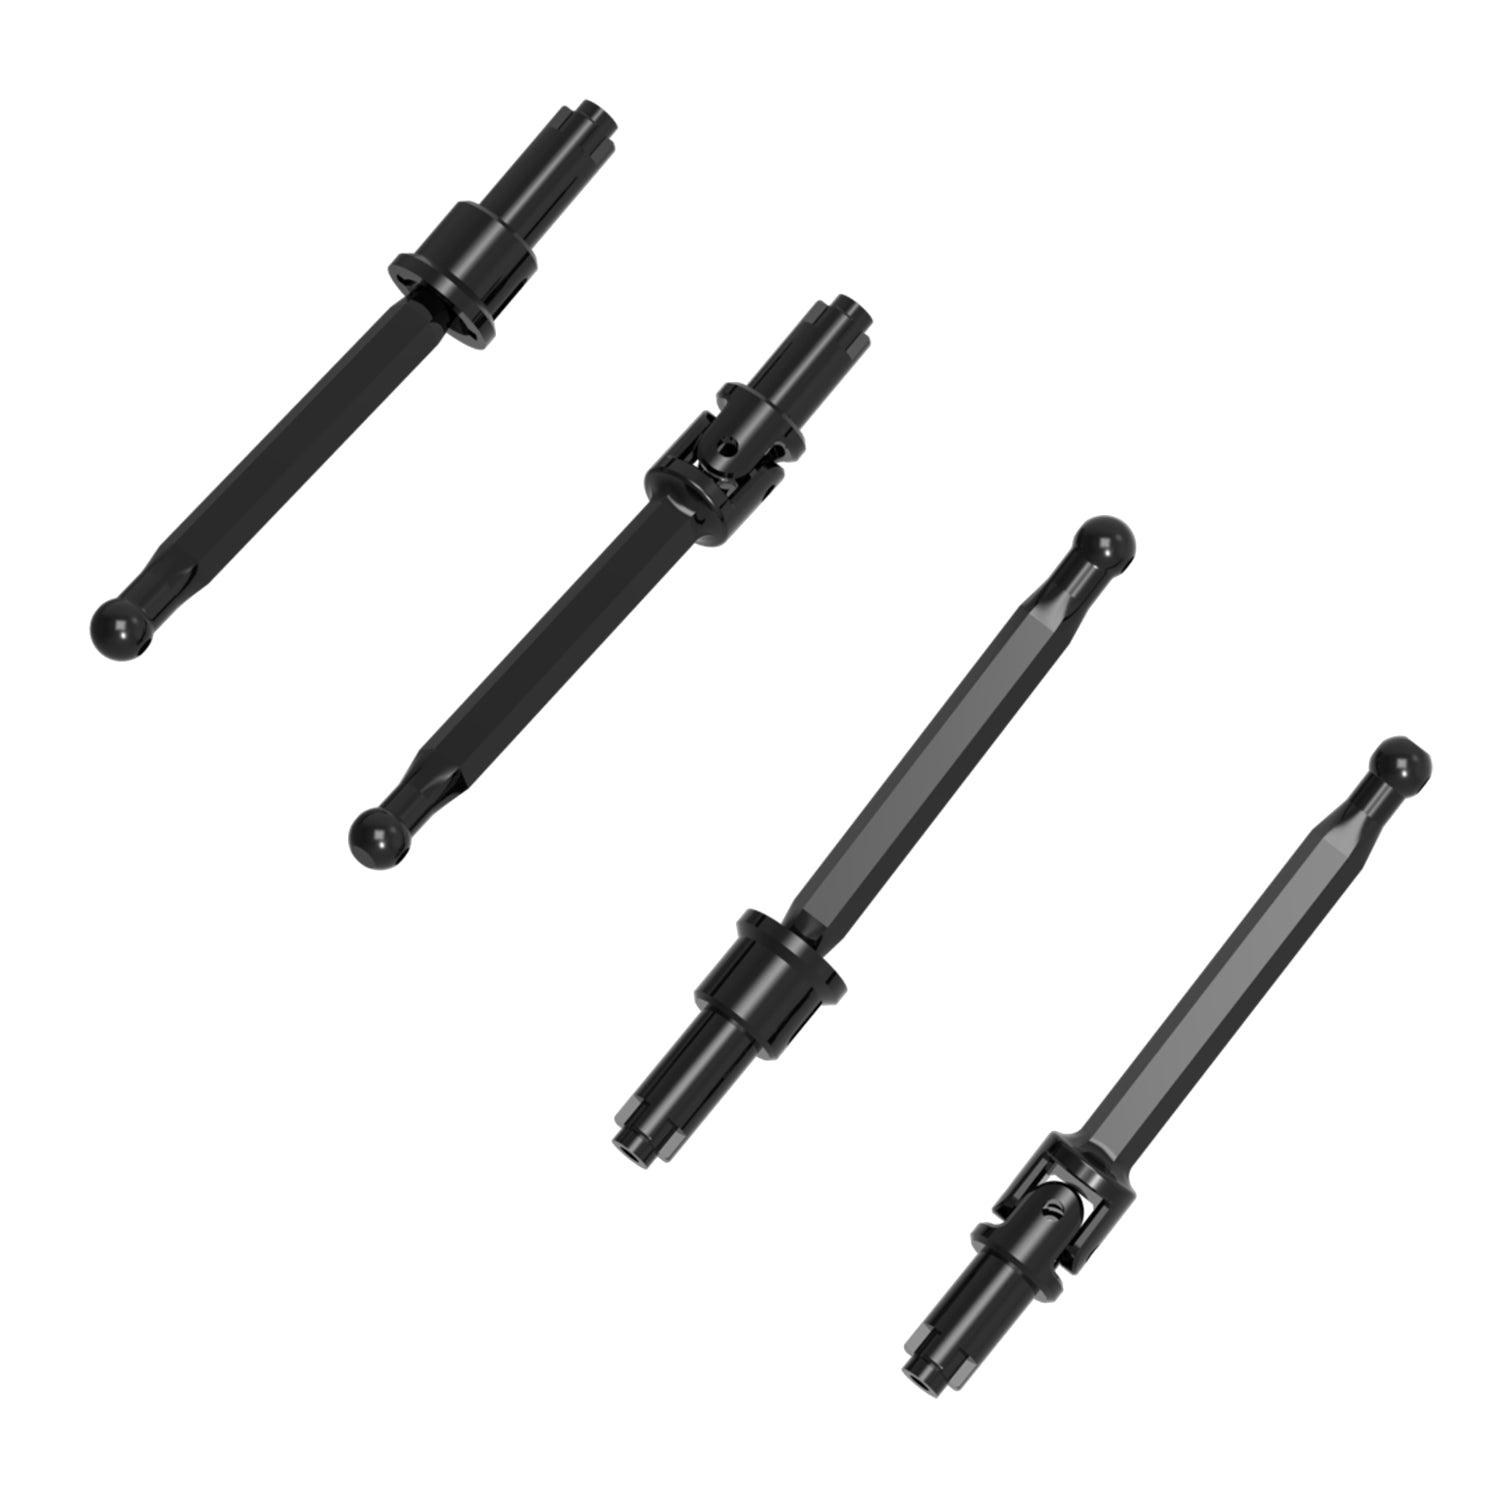 Front & Rear Drive Shaft Set for 1/16 Remote Control Truck Crossy / Sand Storm / Tornado